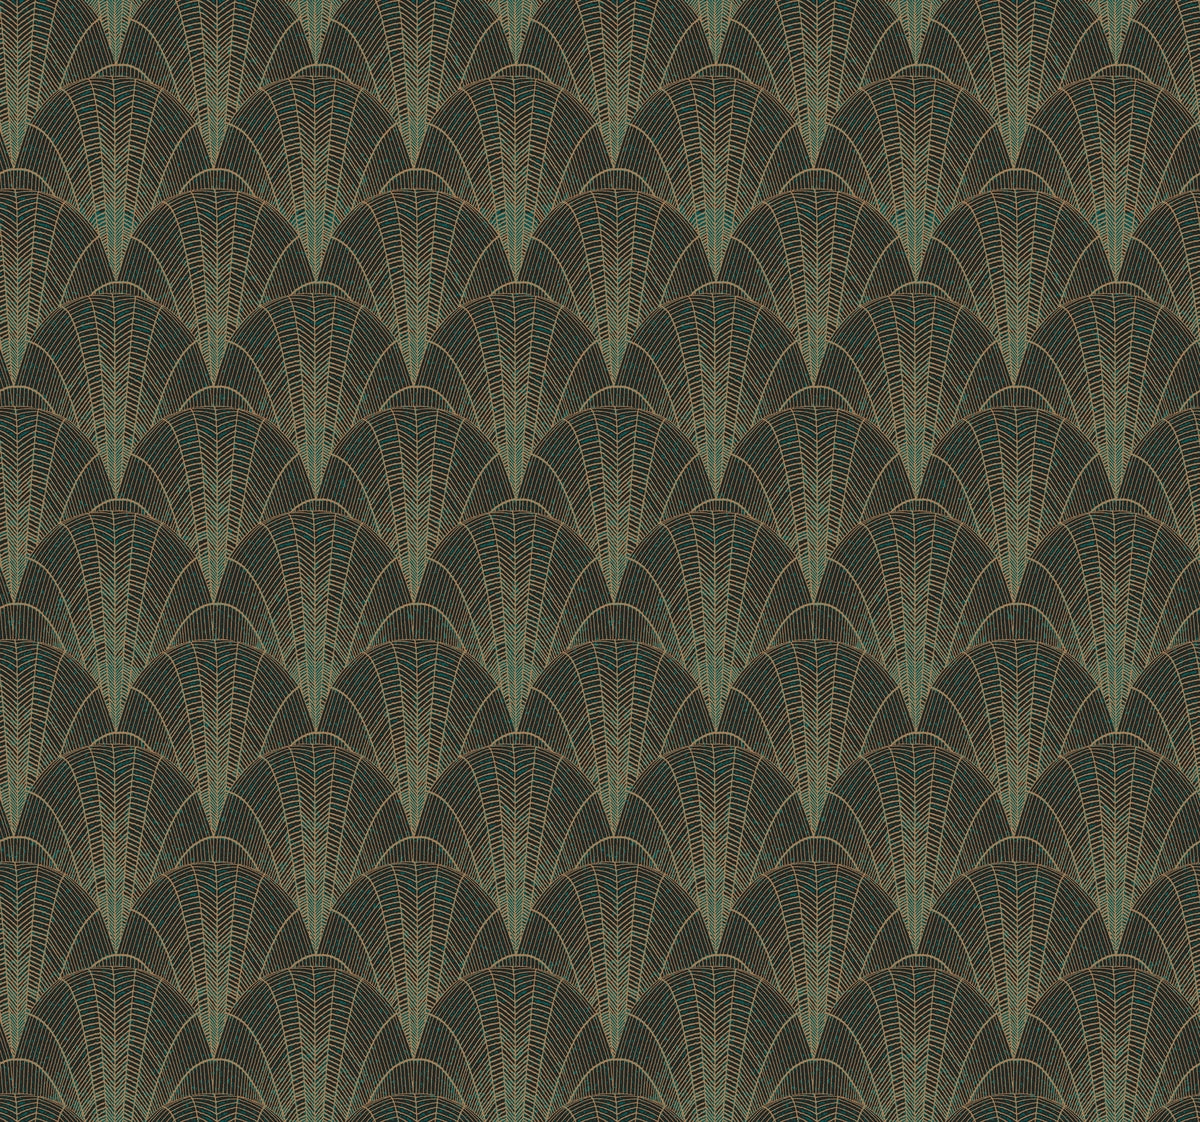 Modern Heritage Scalloped Pearls Wallpaper - SAMPLE ONLY